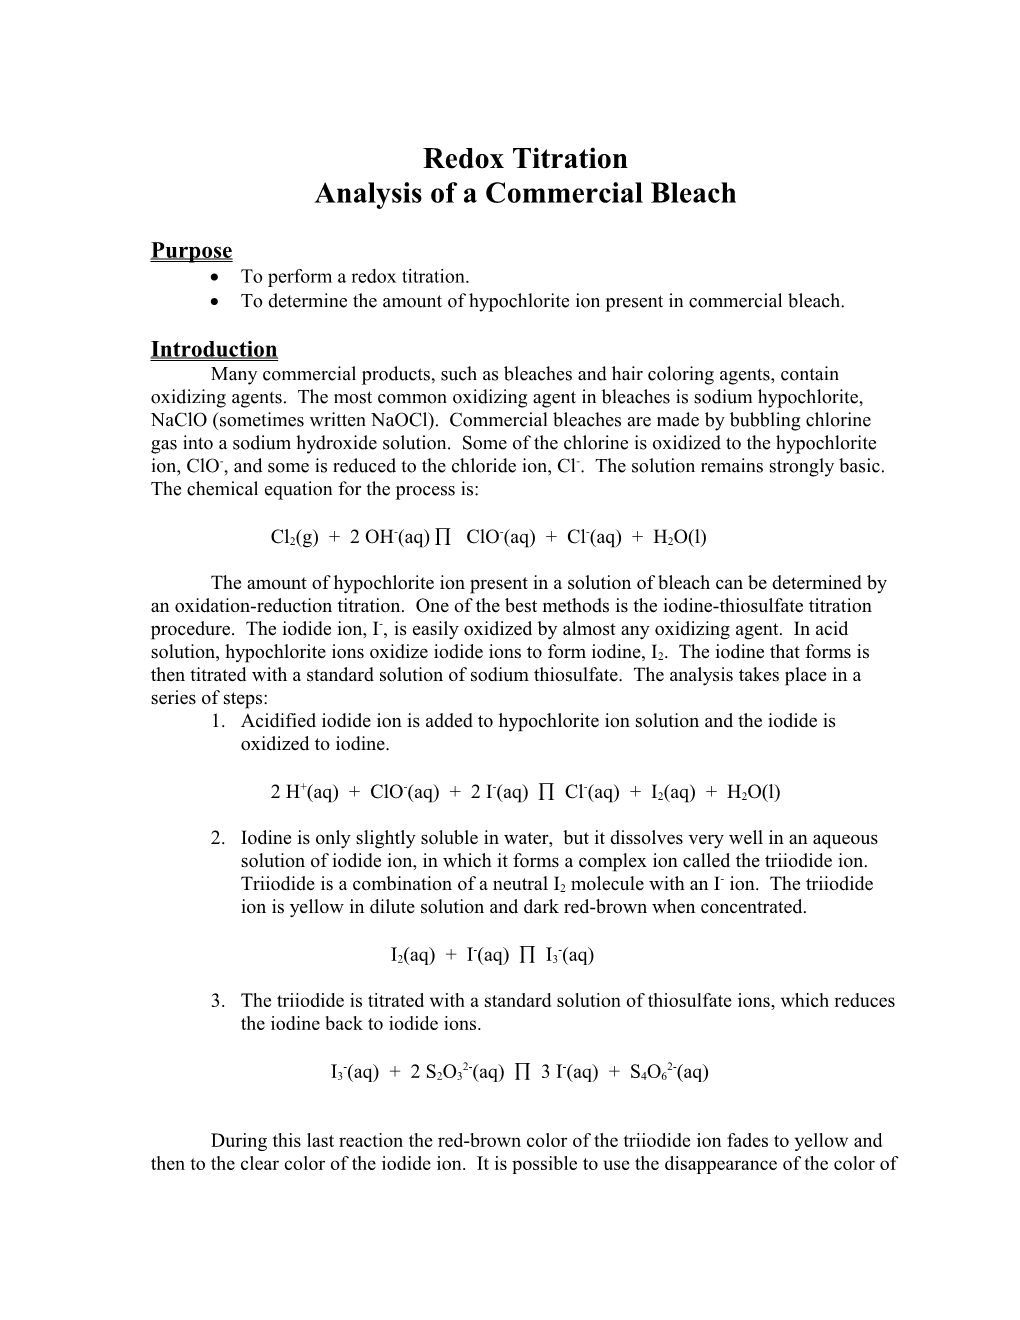 Redox Titration: Analysis of Commercial Bleach